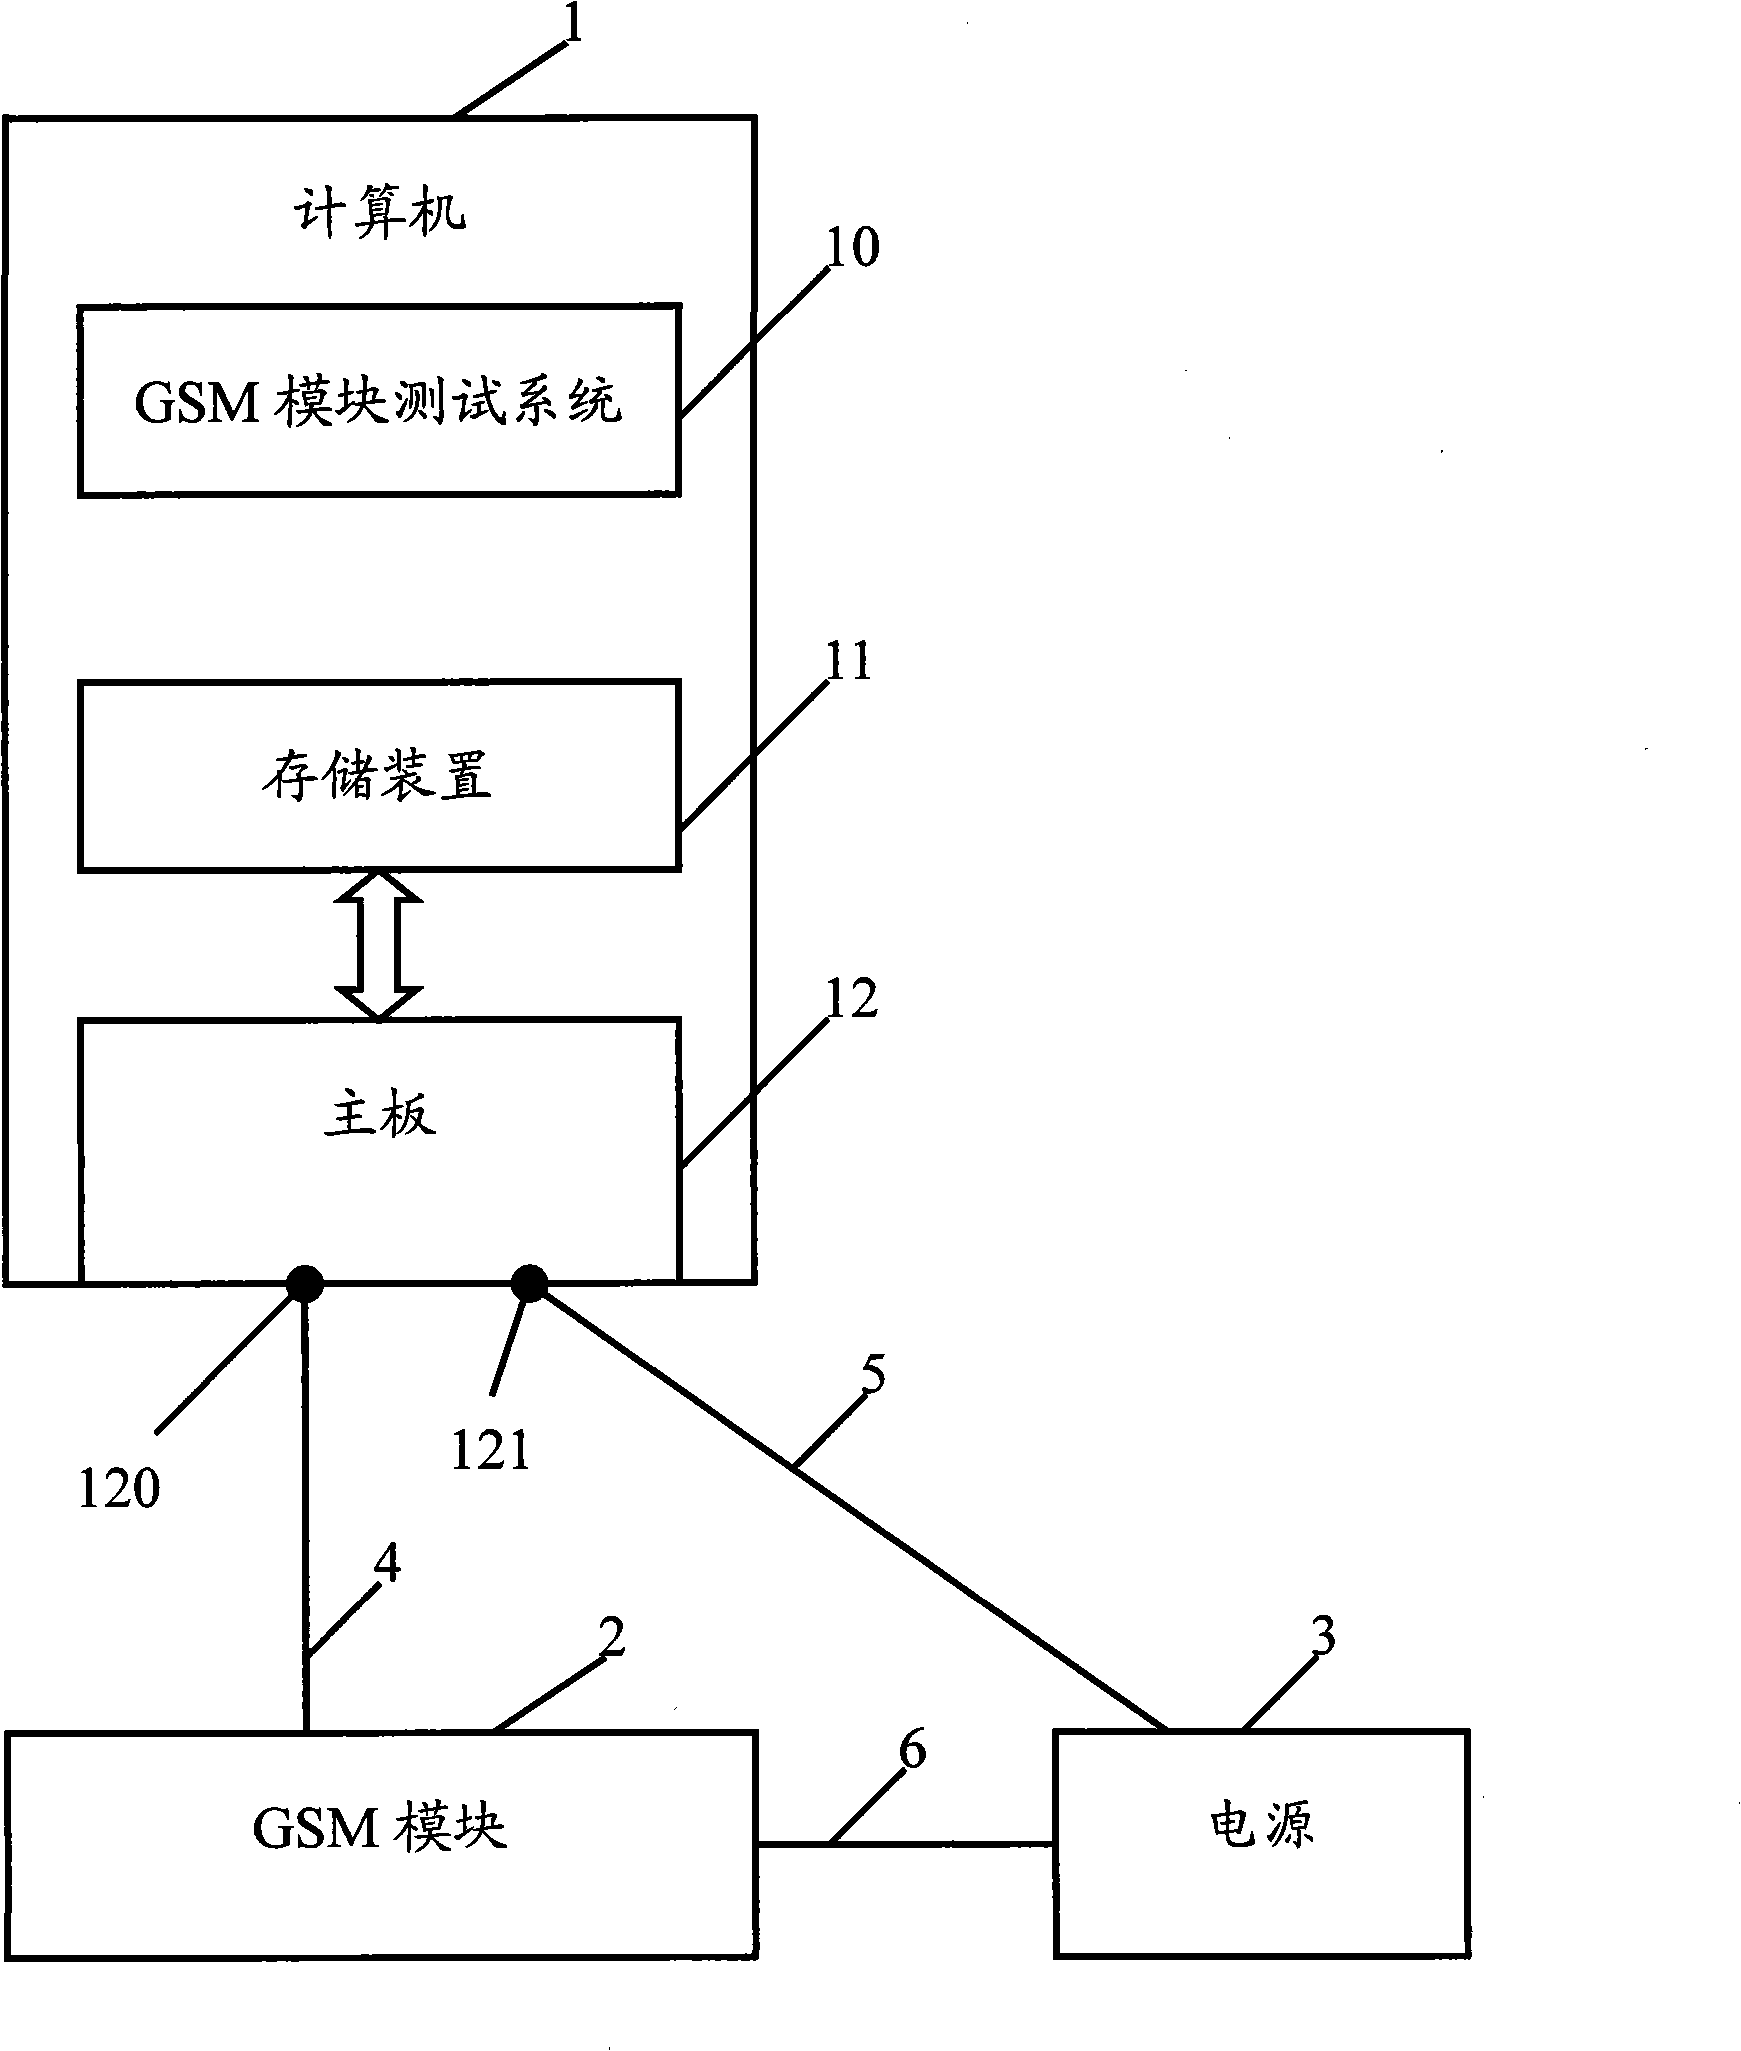 GSM module test system and method